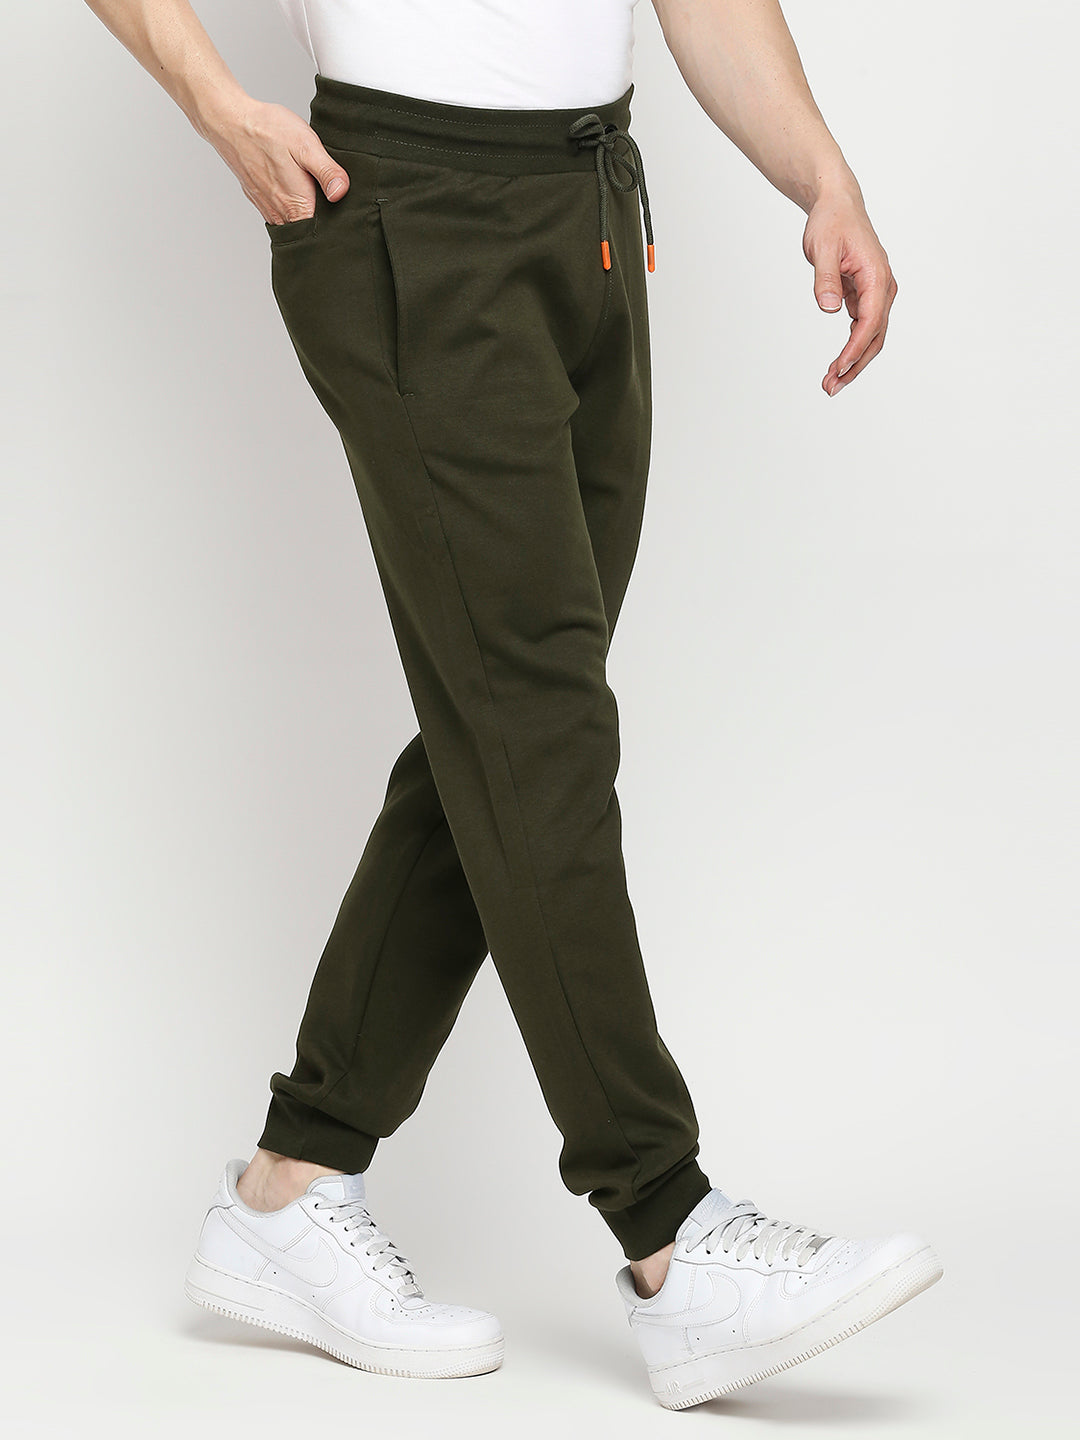 Men Cotton Blend Knitted Rifle Green Trackpant- Underjeans by Spykar